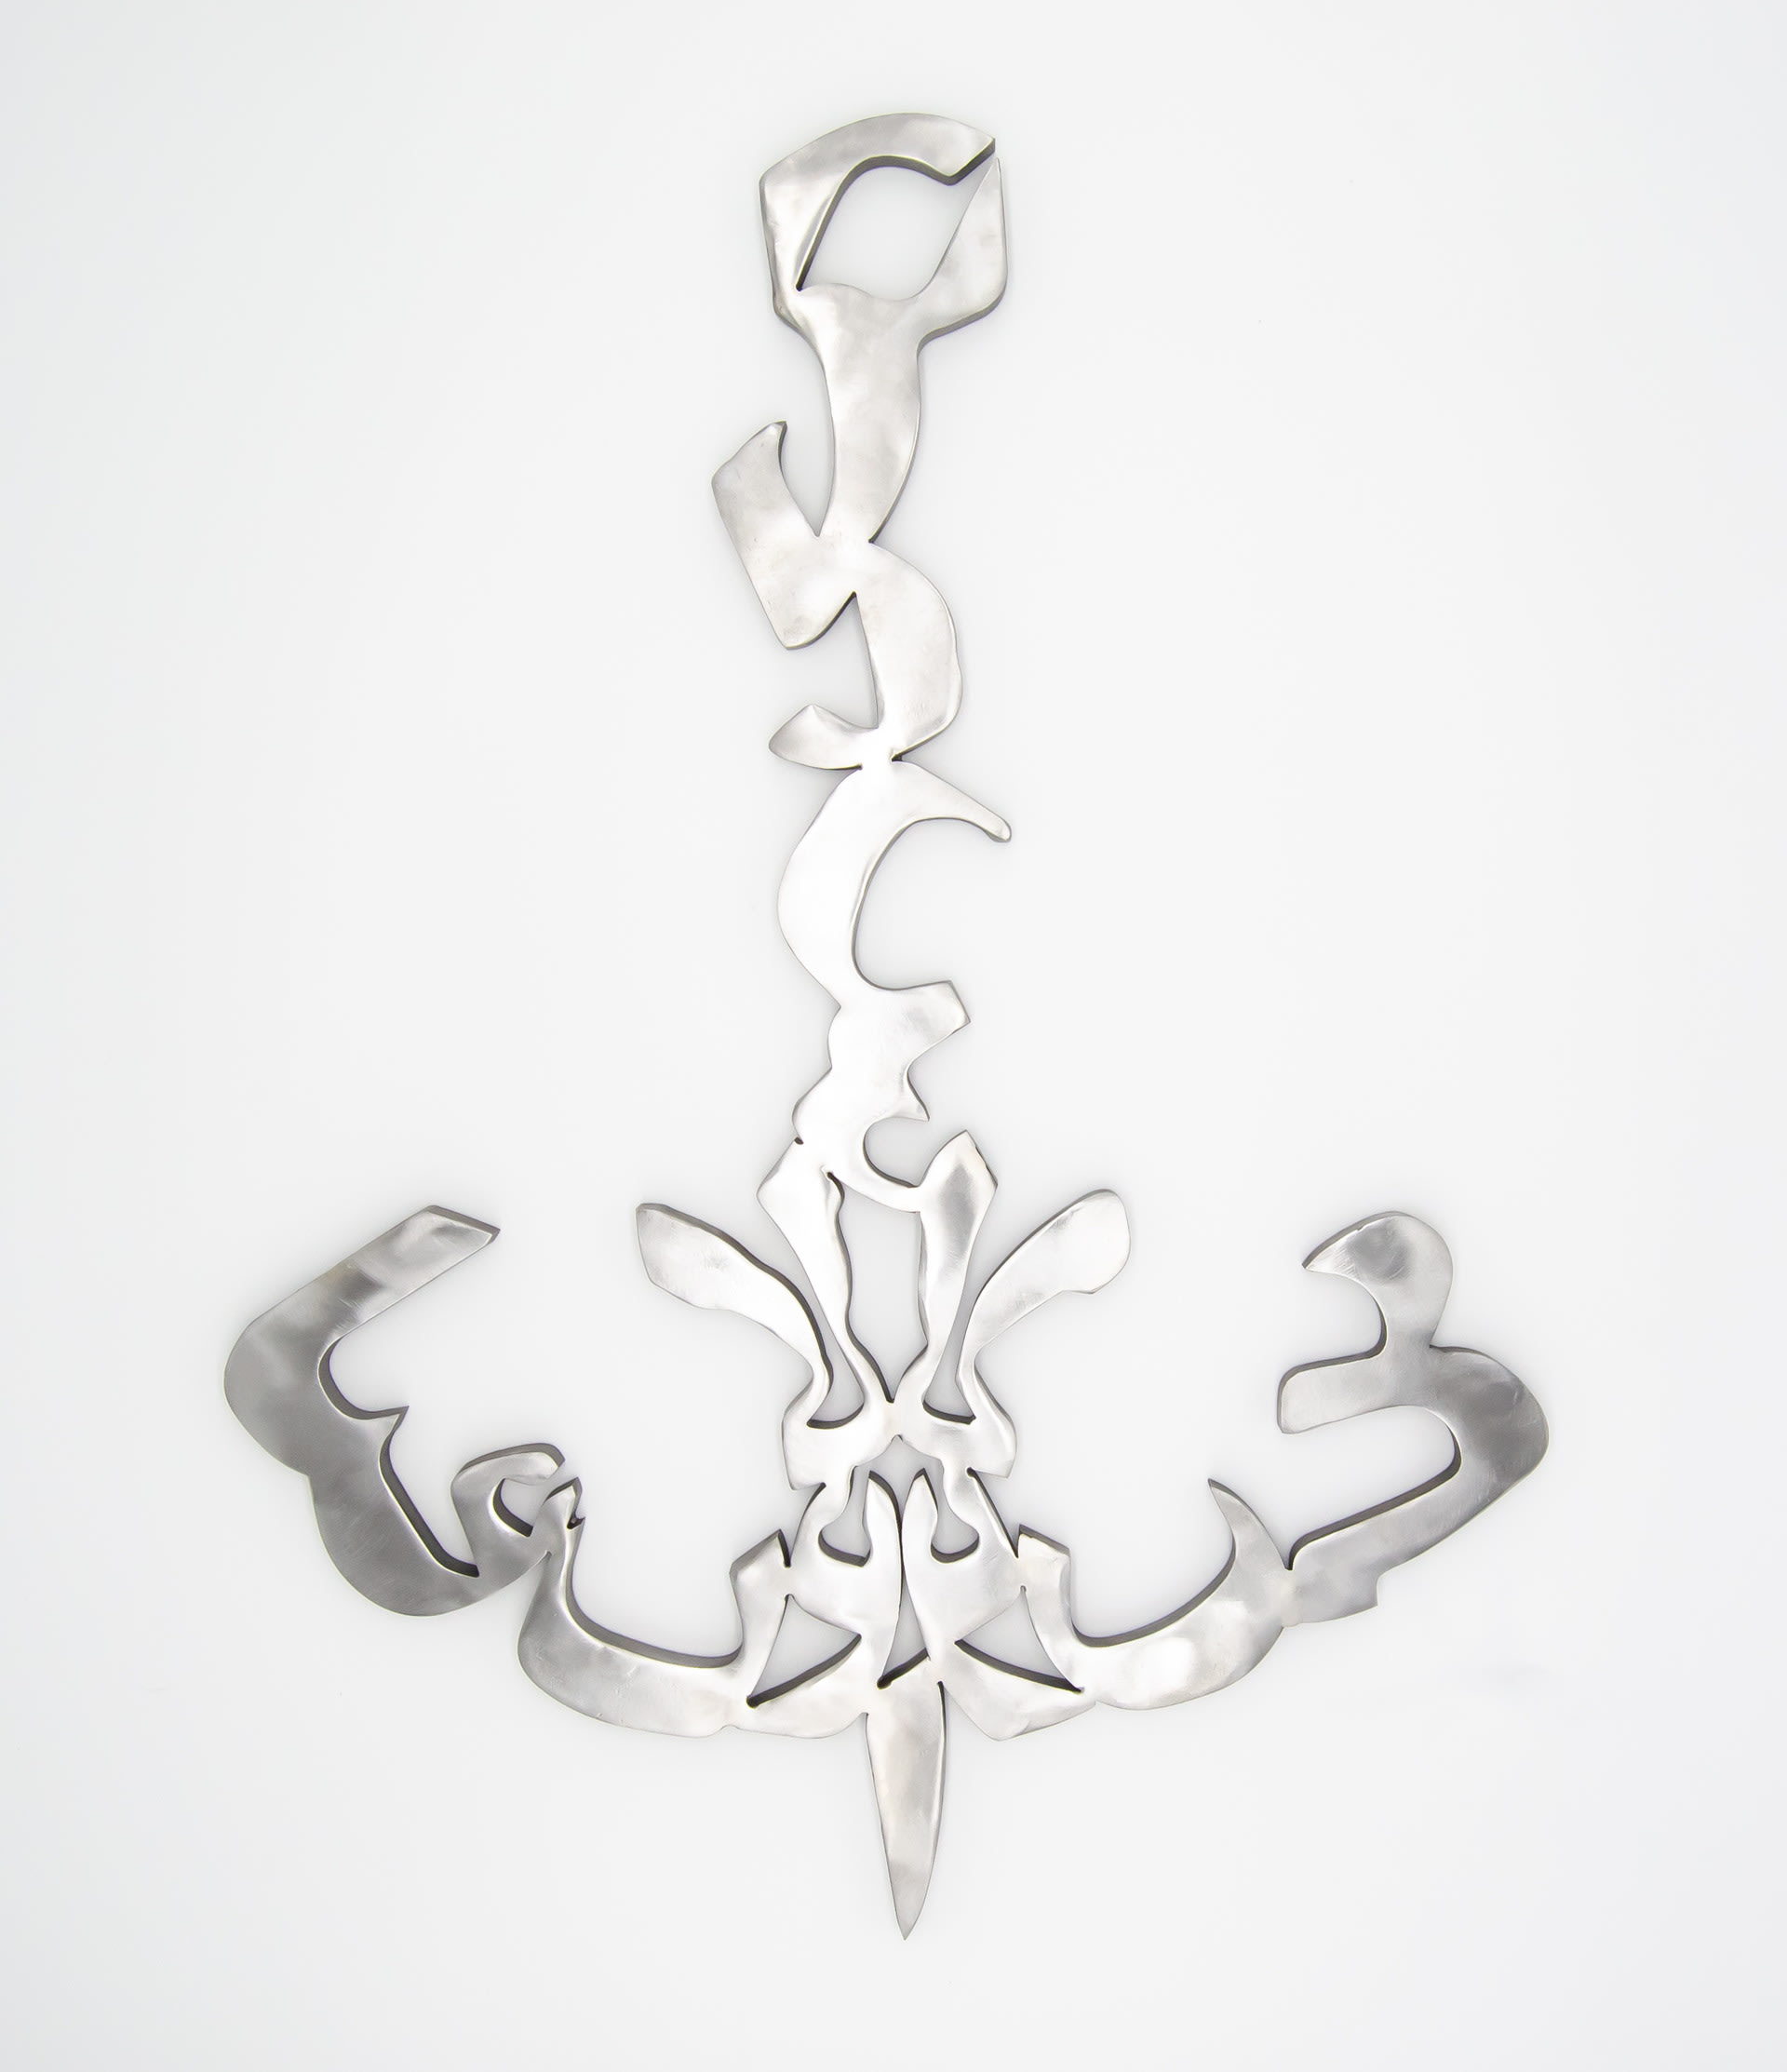 Mild steel anchor made of Arabic calligraphy